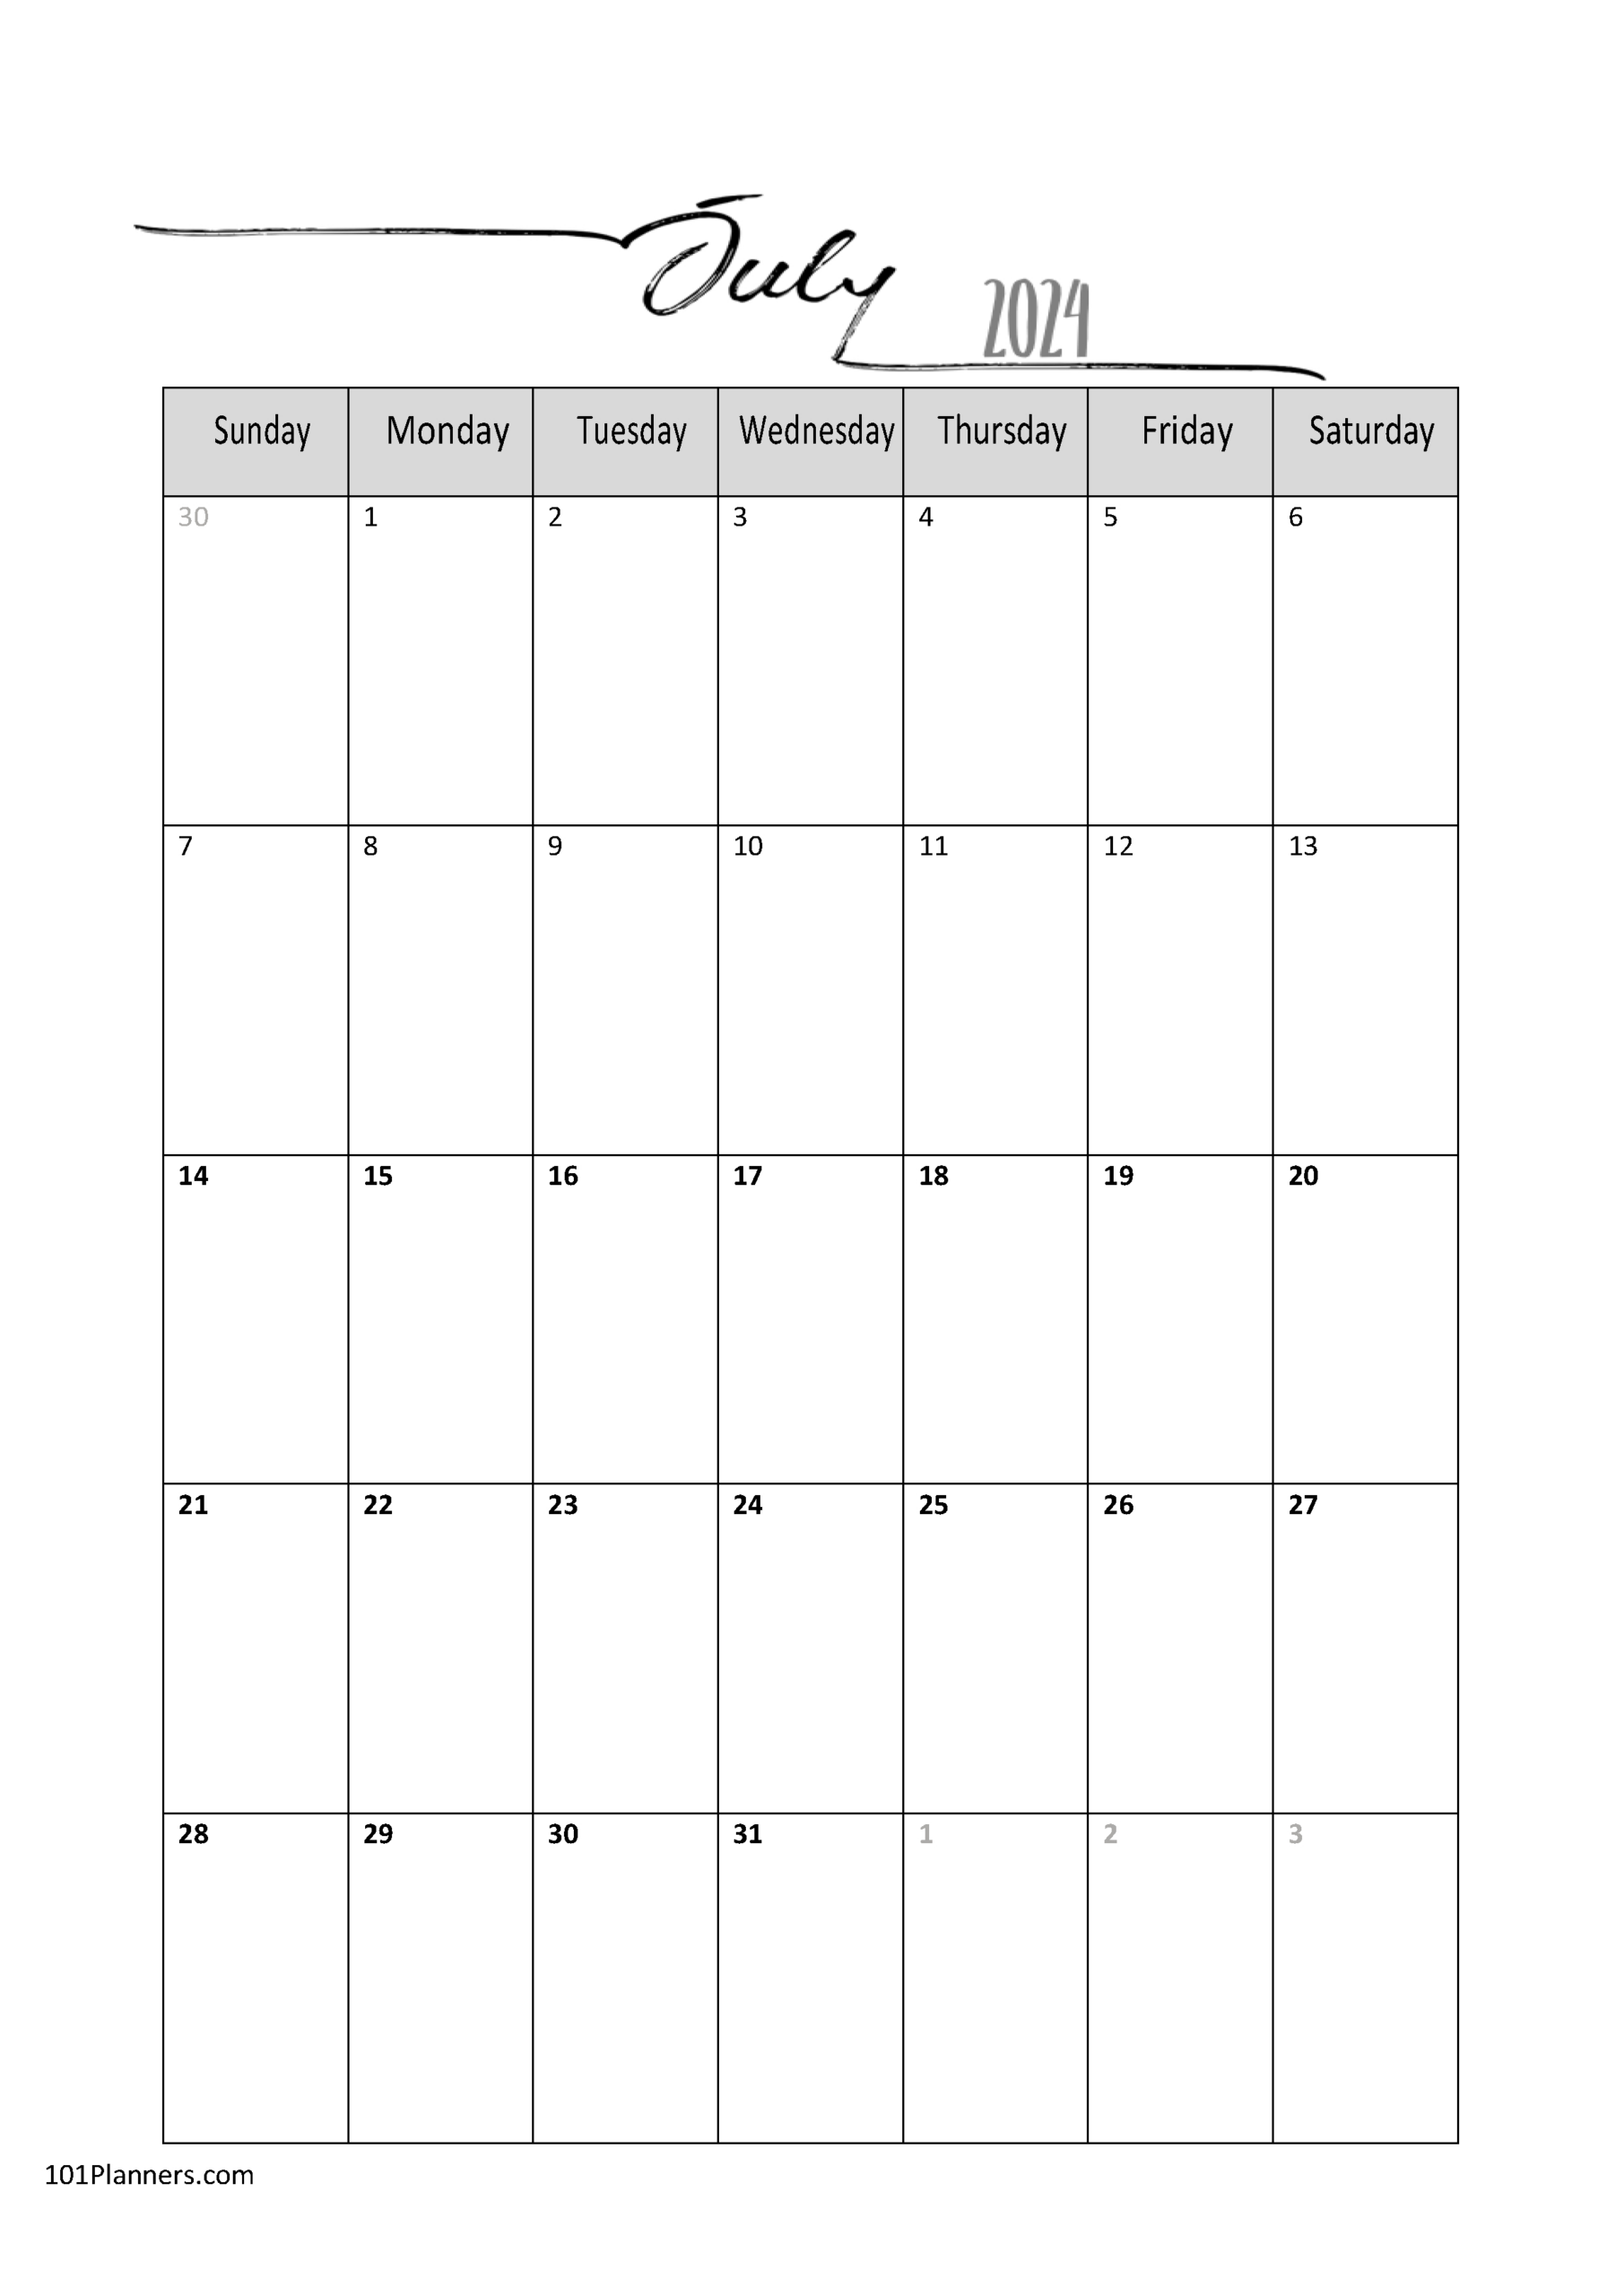 Free 2024 Calendar Template Word | Instant Download for July 2024 Calendar in Word